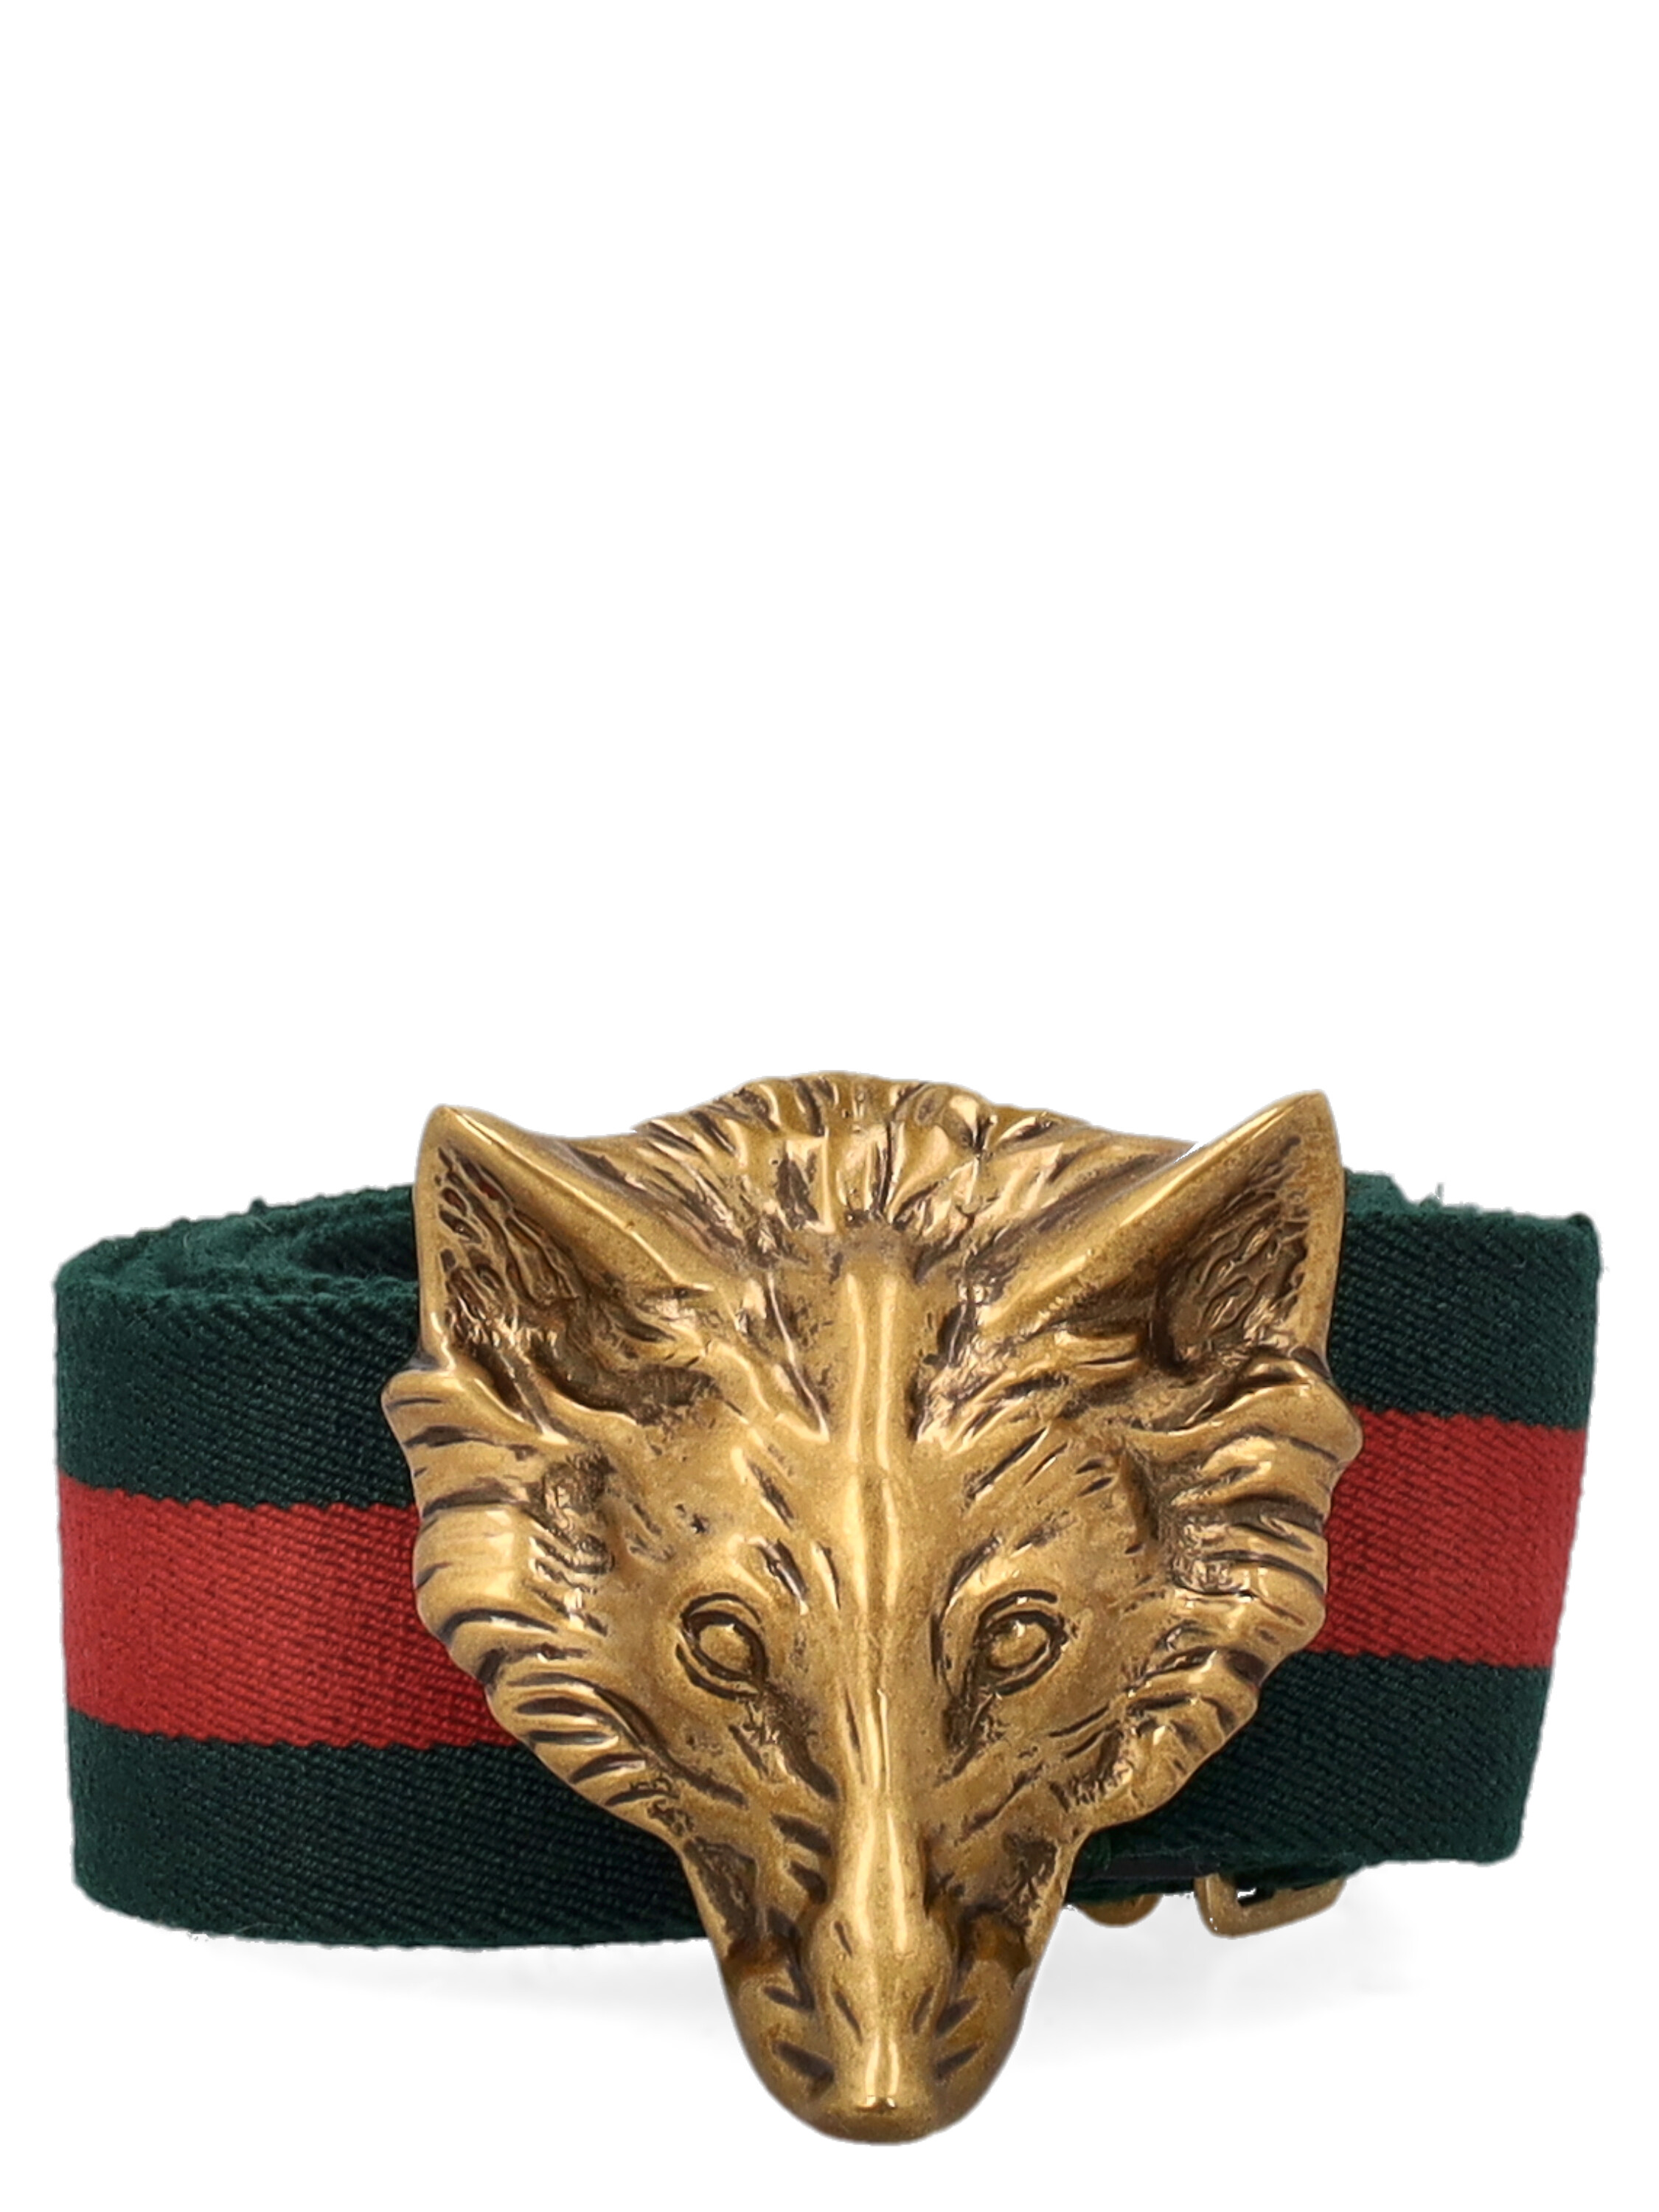 Pre-owned Gucci Women's Belts -  - In Green, Red Fabric